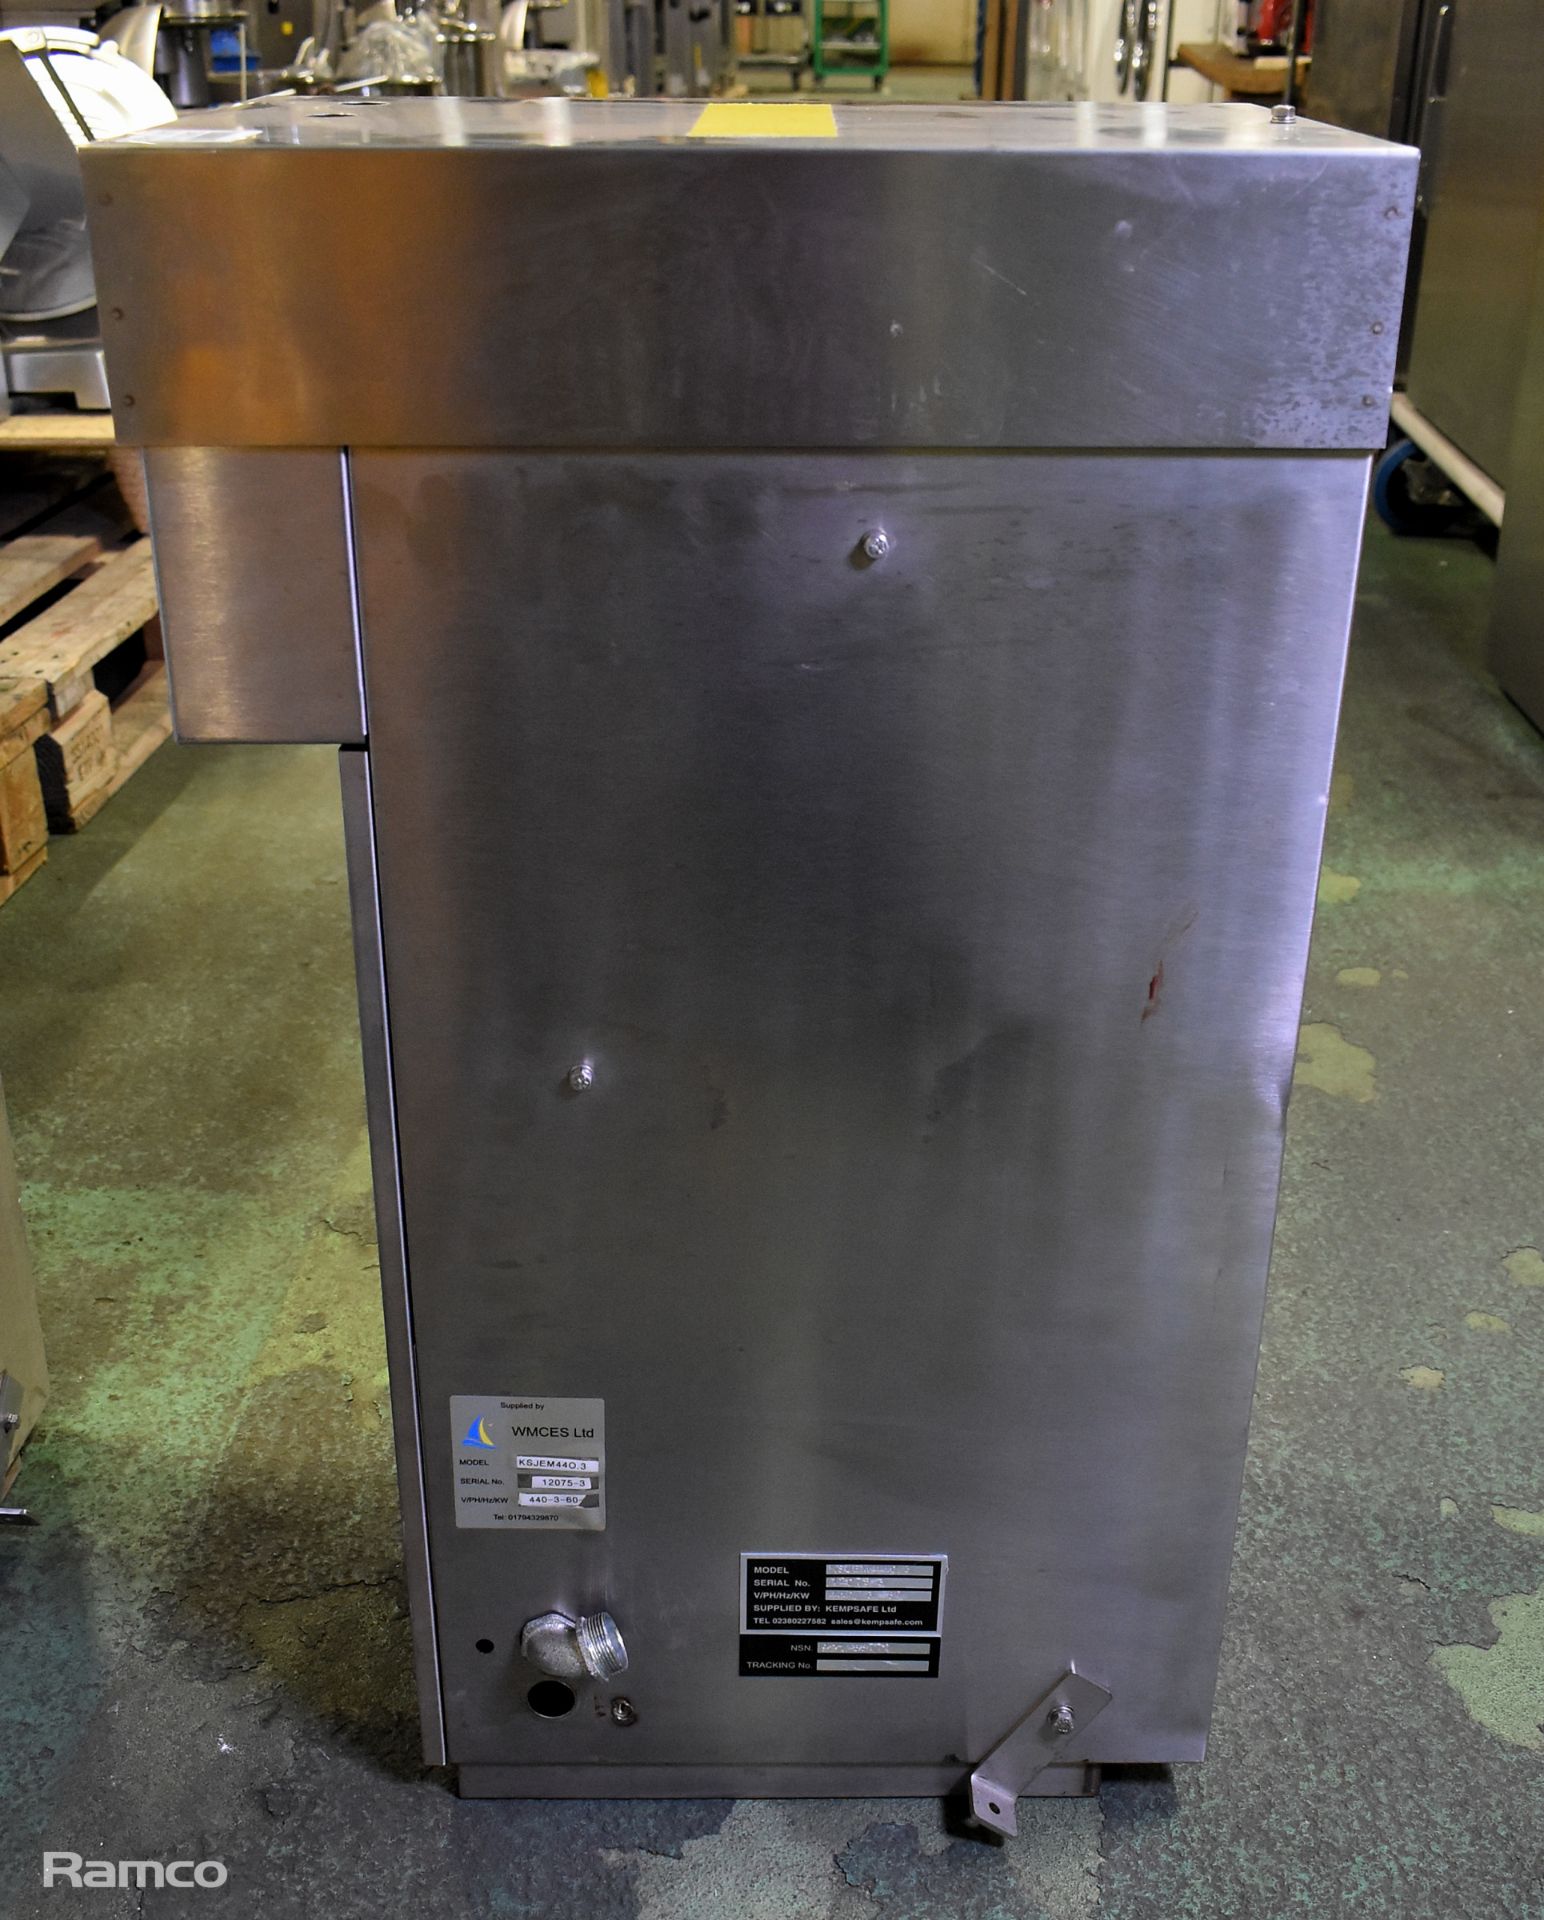 Kempsafe KSJEM440/3 stainless steel continuous water boiler/heater - Missing tap - 440V - 3ph - 60Hz - Image 3 of 3